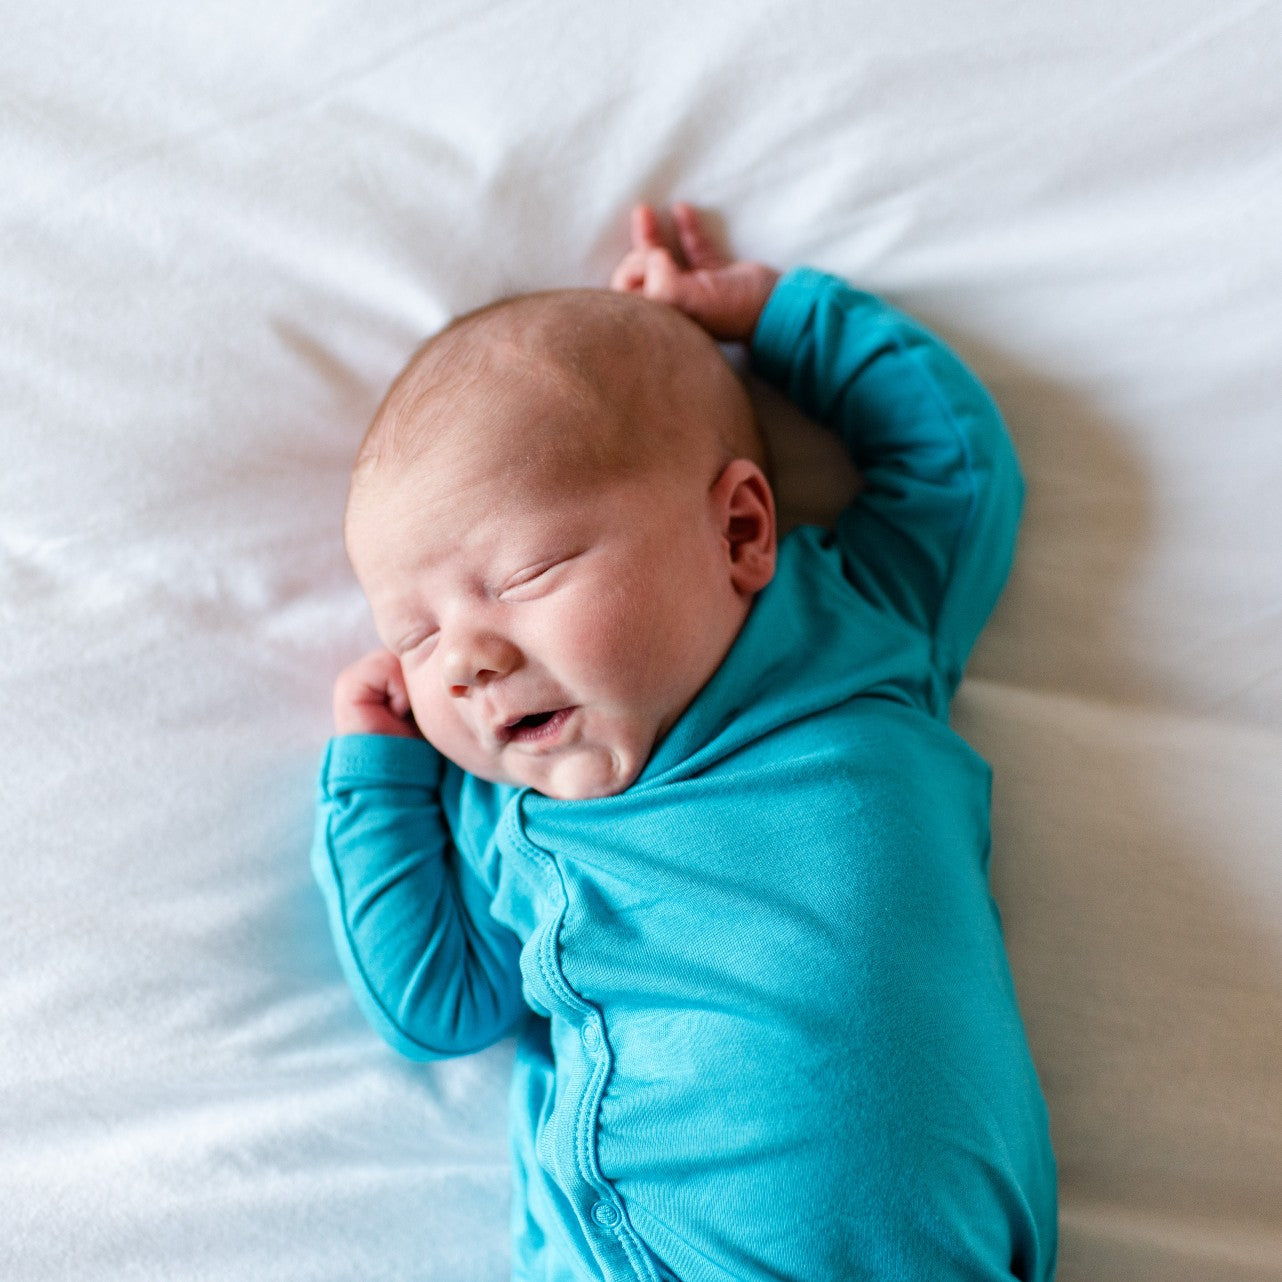 newborn baby laying down with arms above head